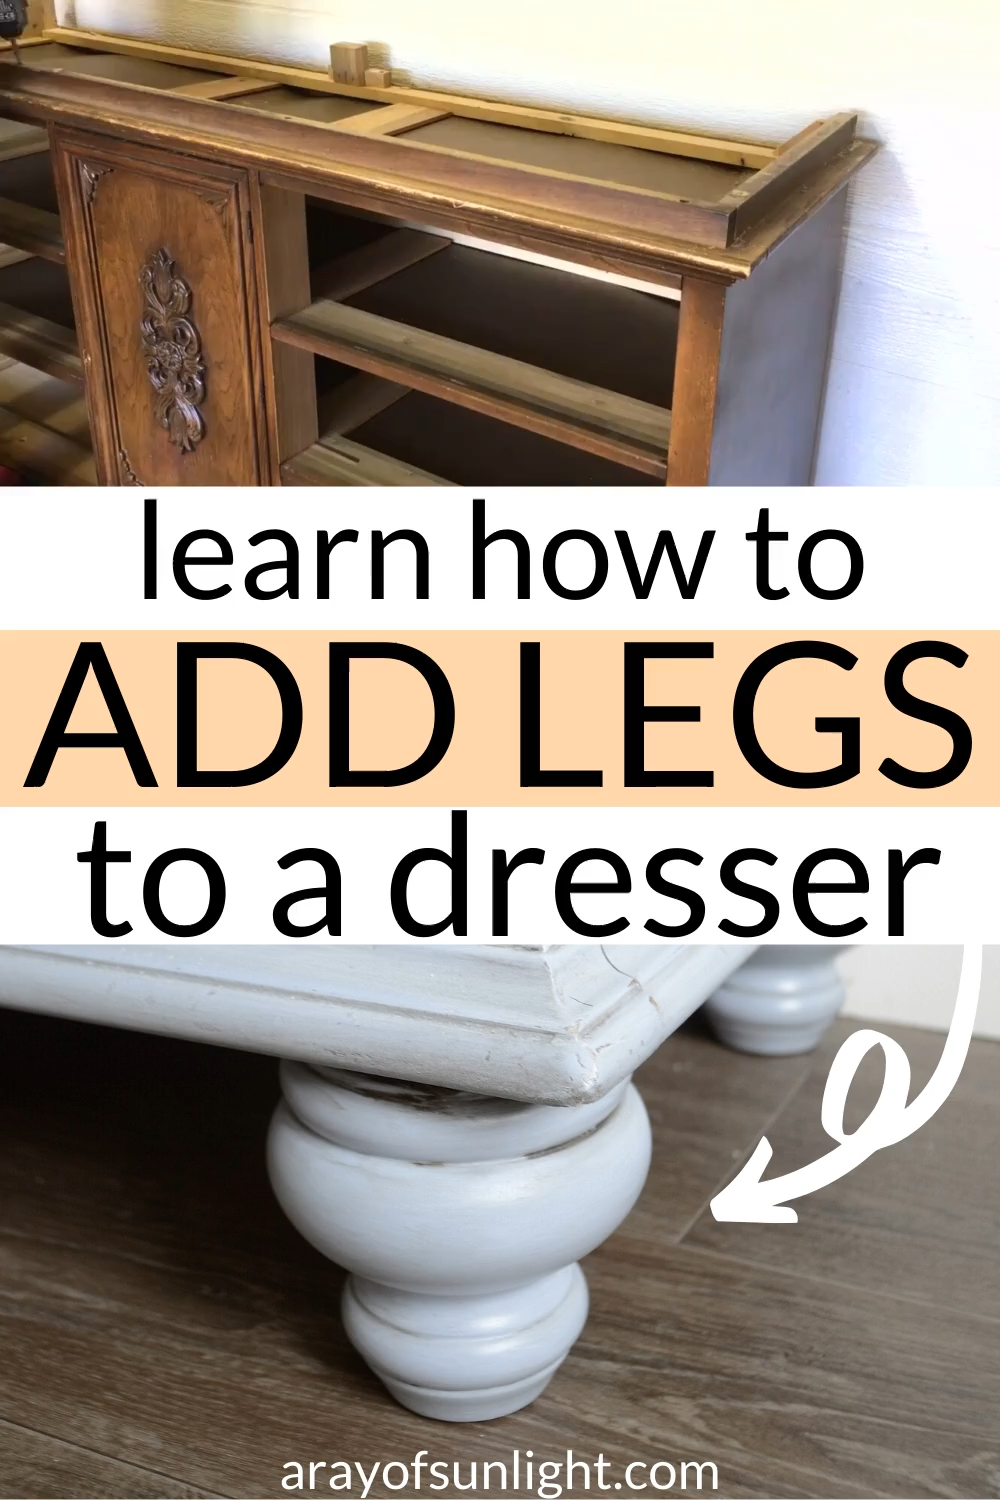 The Best Way to Add Legs to a Dresser - The Best Way to Add Legs to a Dresser -   18 diy Furniture livingroom ideas